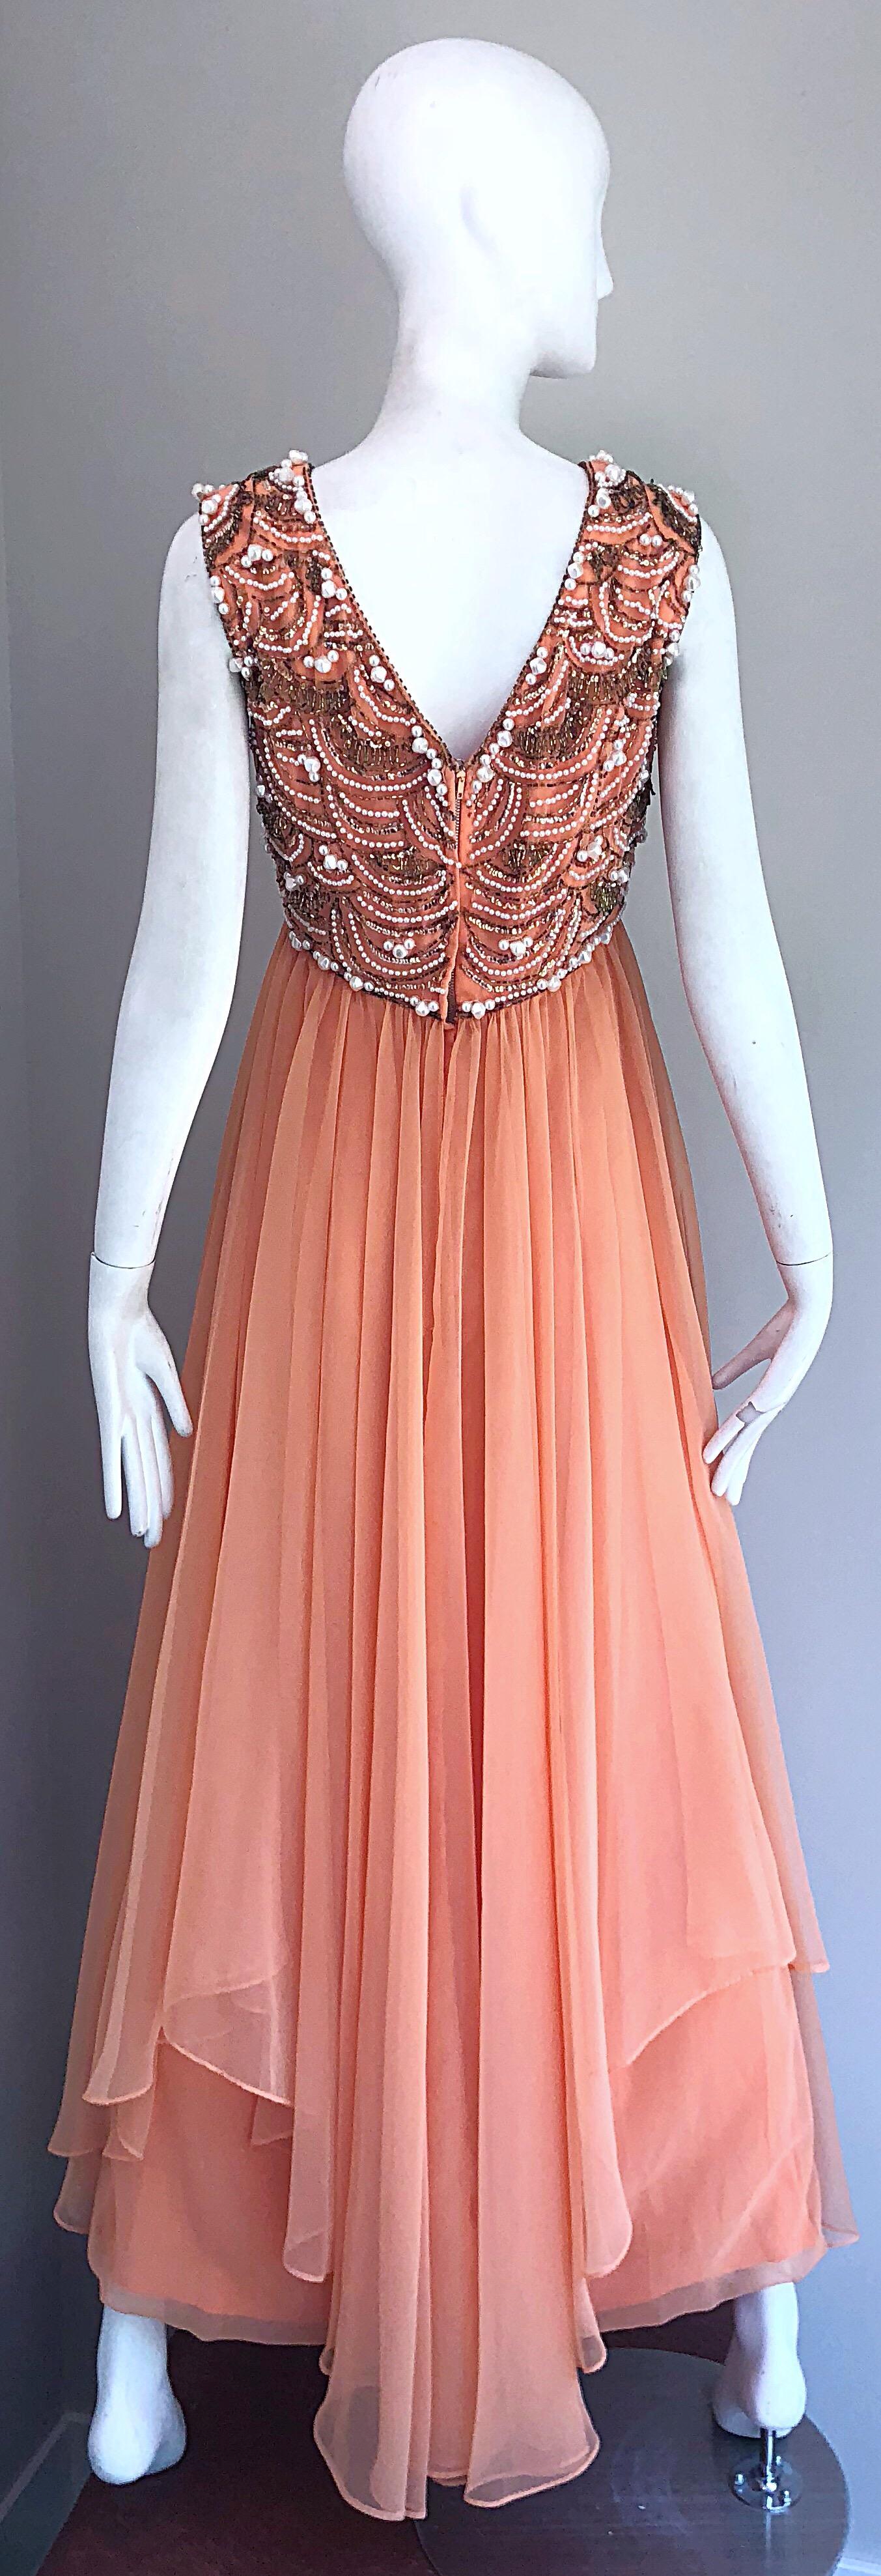 1960s Isabell Gerhart Sherbet Coral Demi Couture Beaded Chiffon 60s Gown Dress For Sale 4